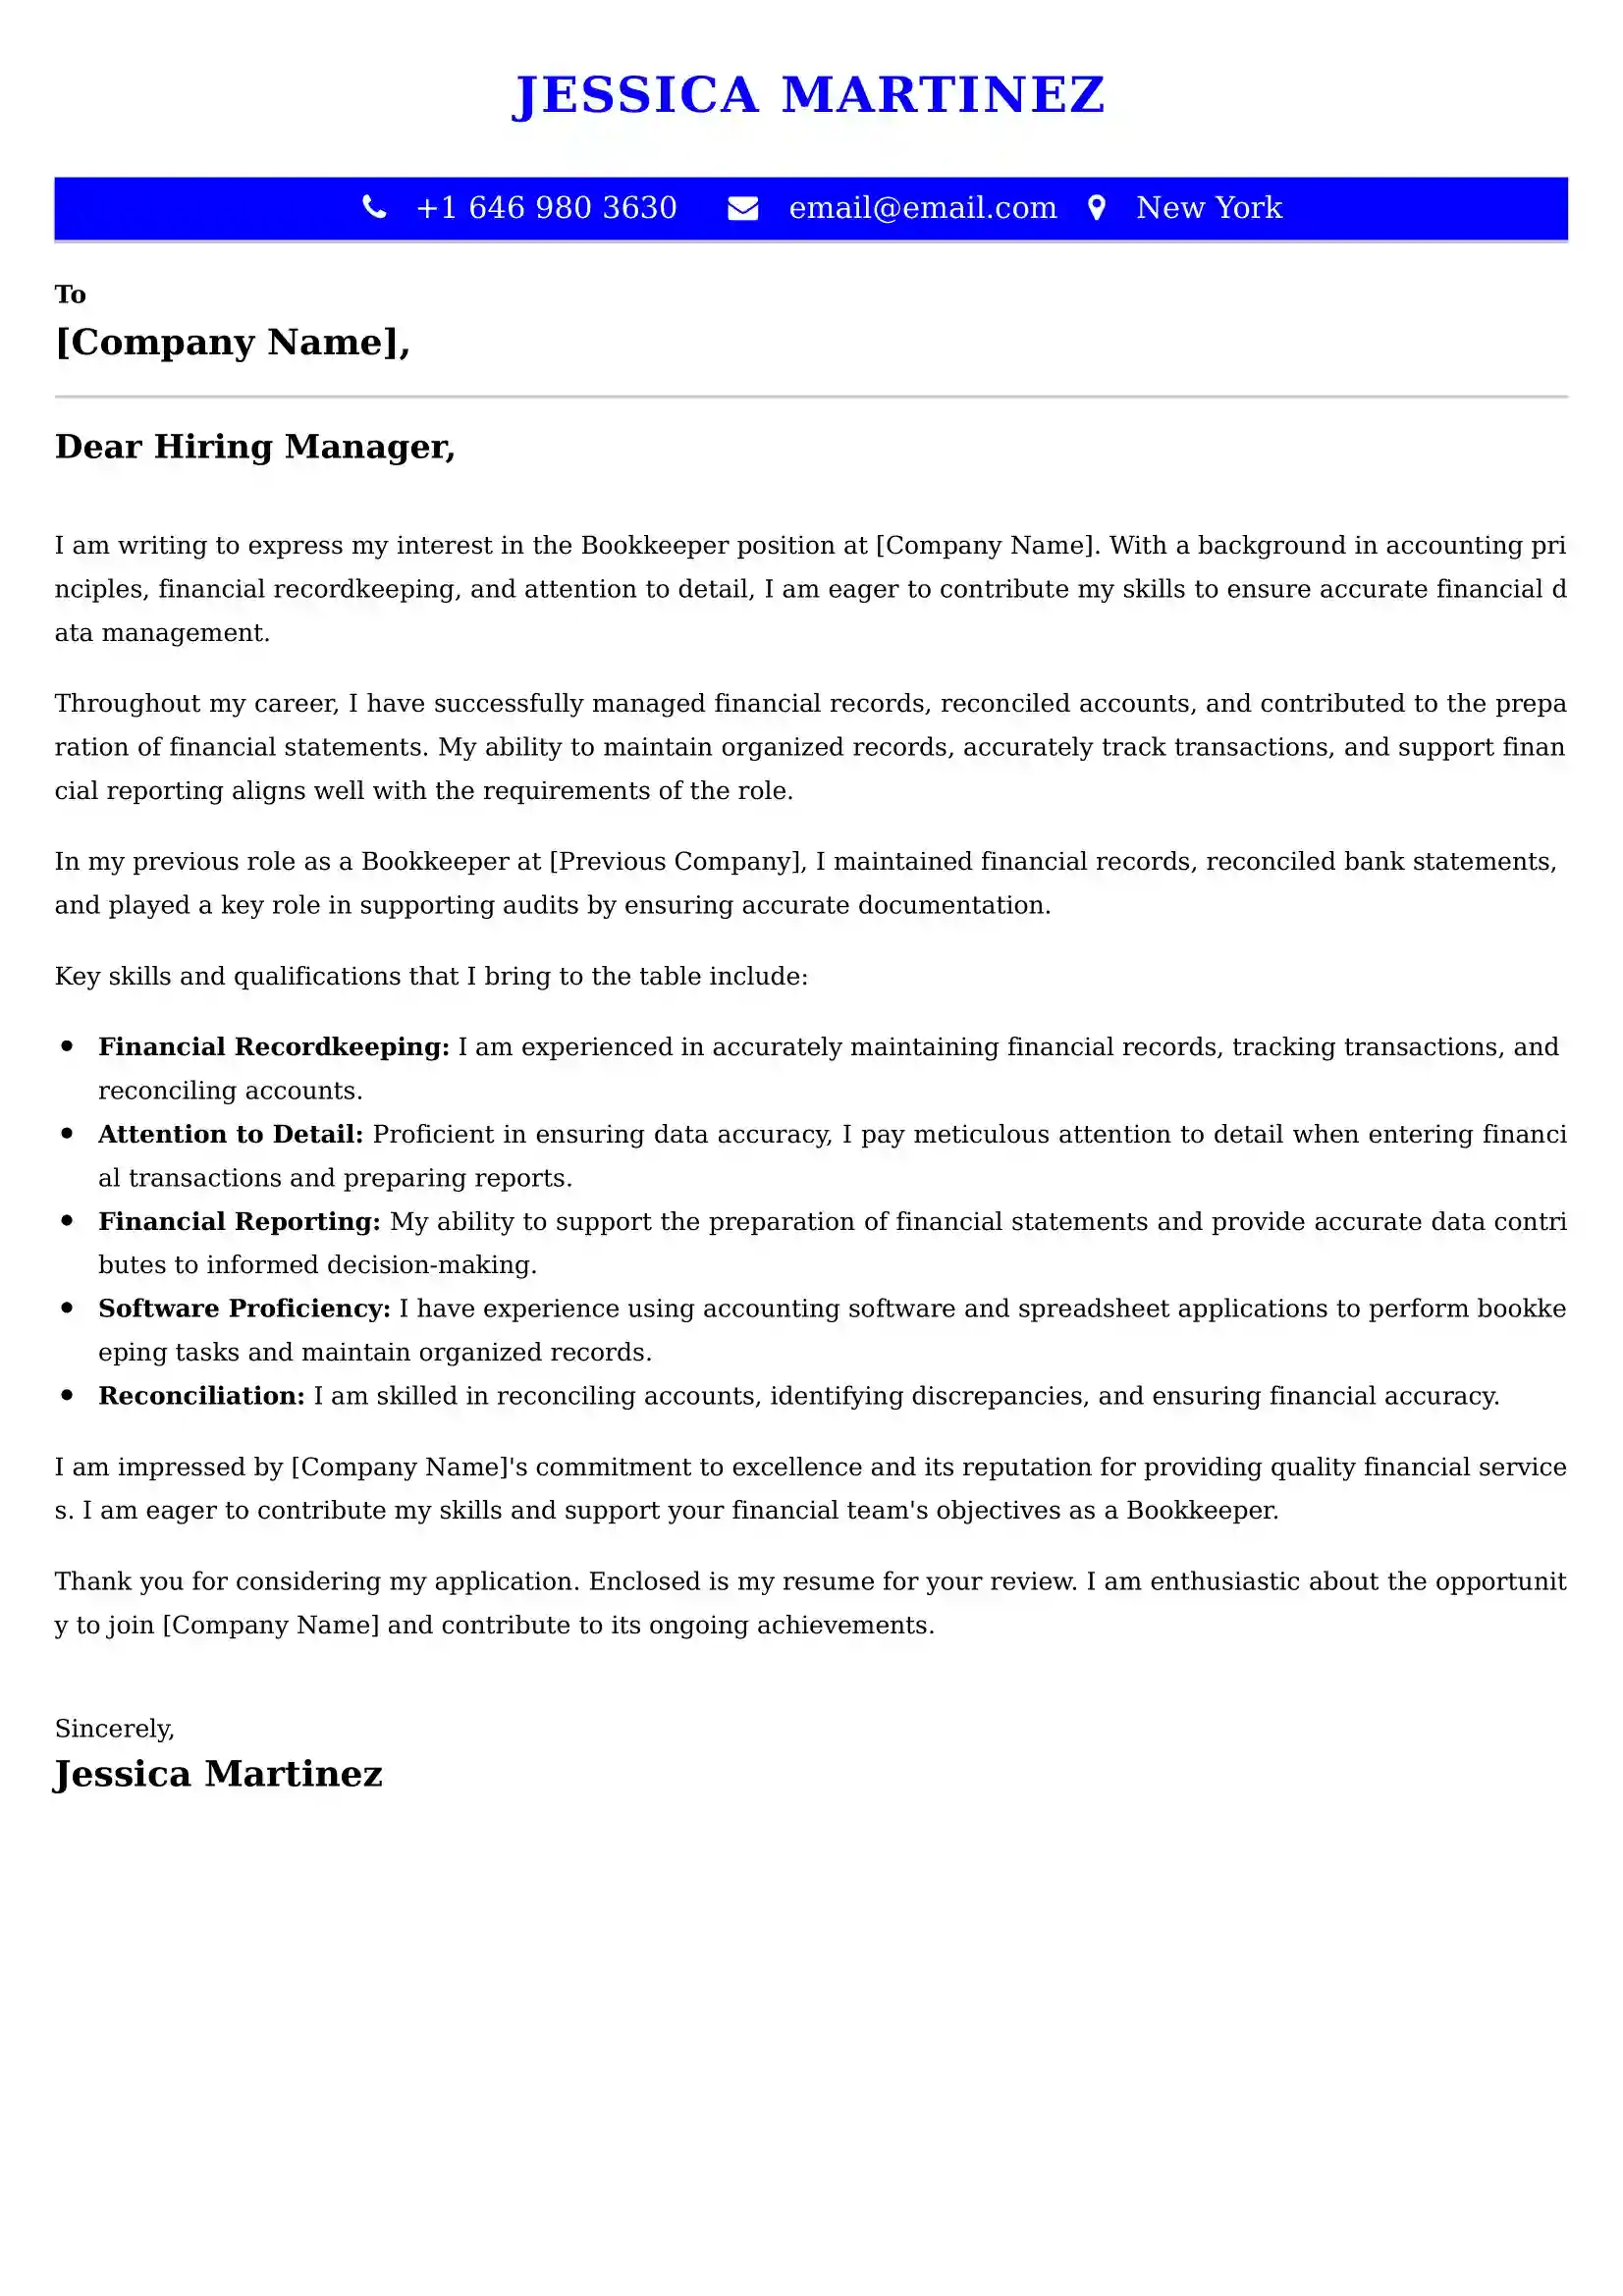 Bookkeeper Cover Letter Examples -Latest Brazilian Templates